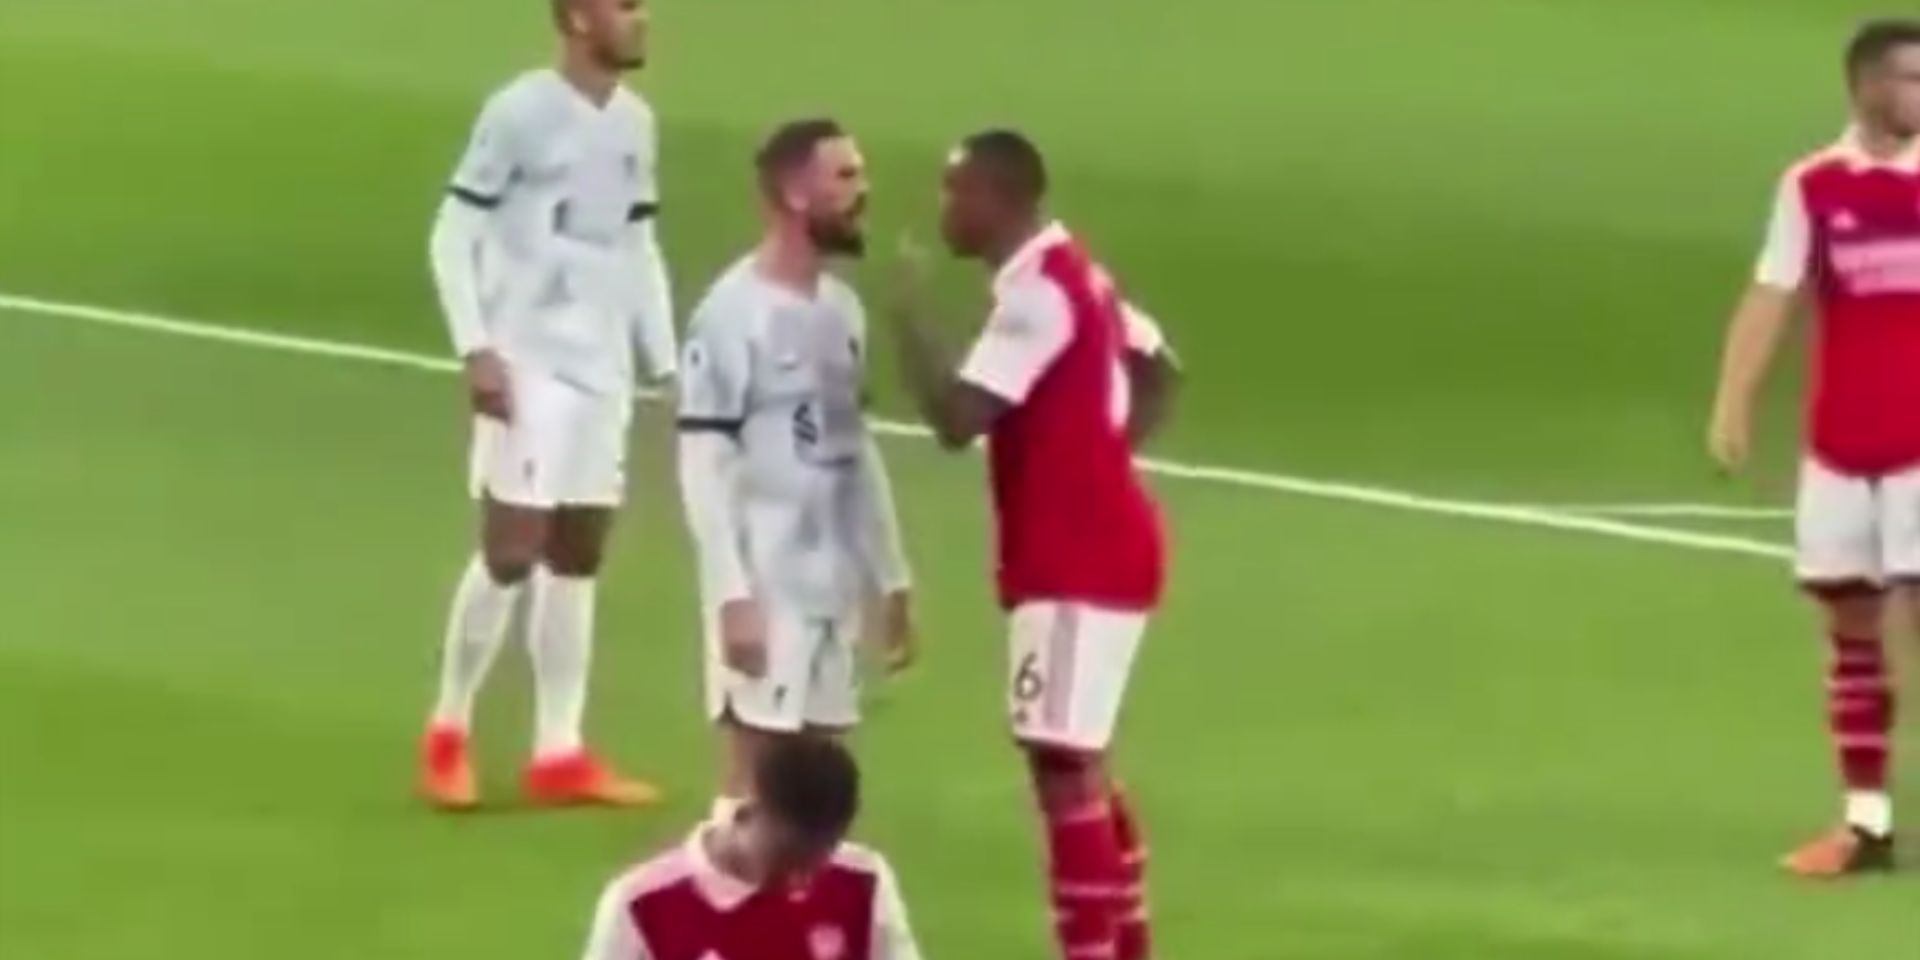 (Video) Fan footage of the incident between Henderson and Gabriel which the FA are ‘investigating’